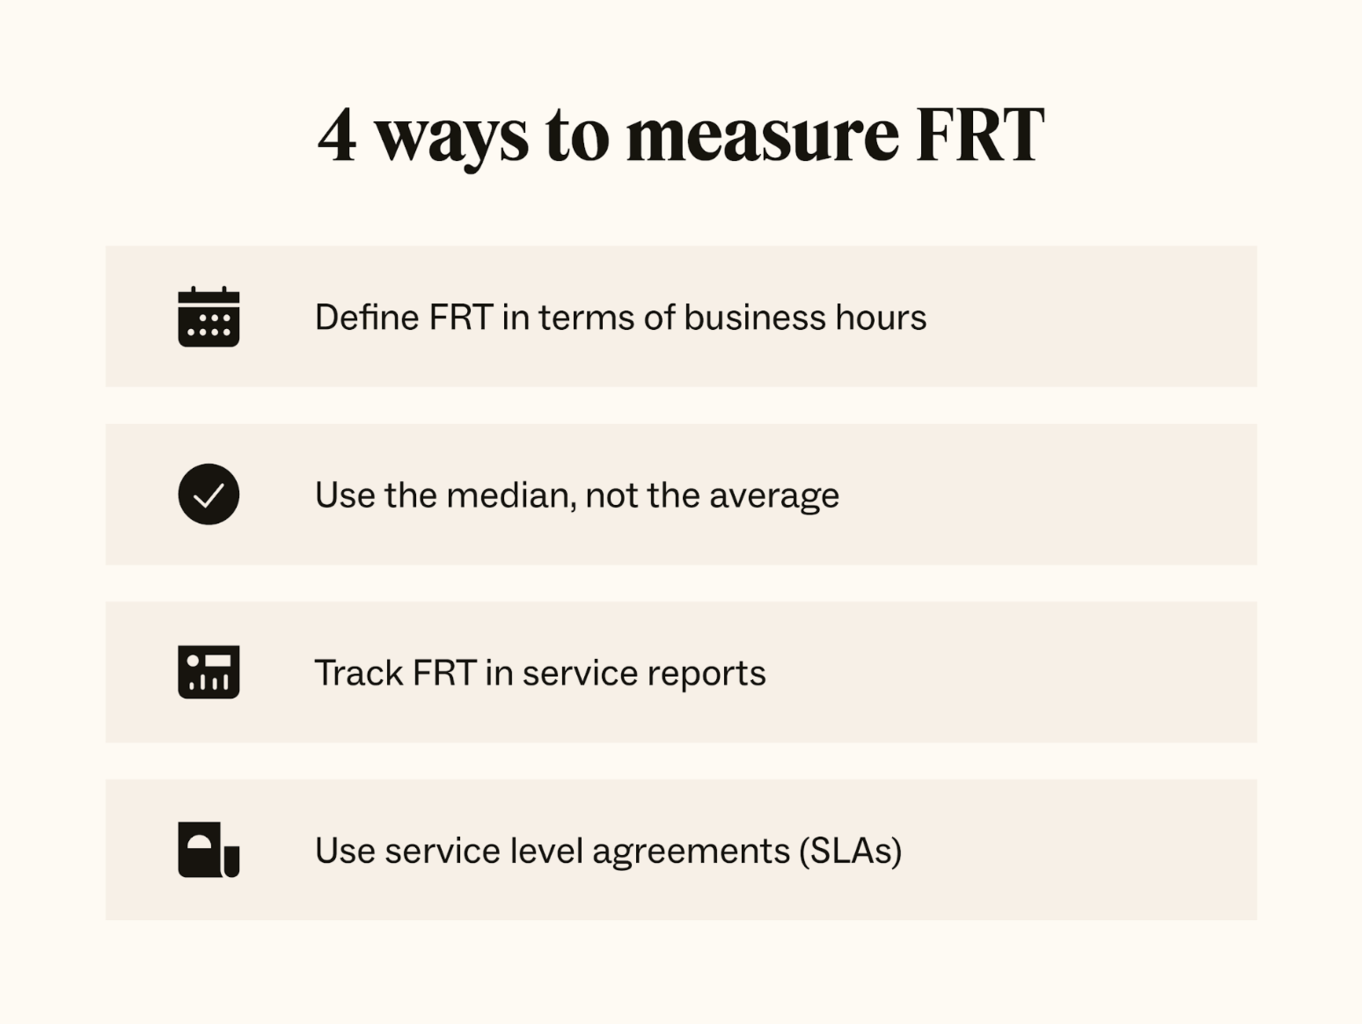 You can measure FRT by defining it in terms of business hours, using the median instead of the average, tracking FRT in service reports, and using SLAs.